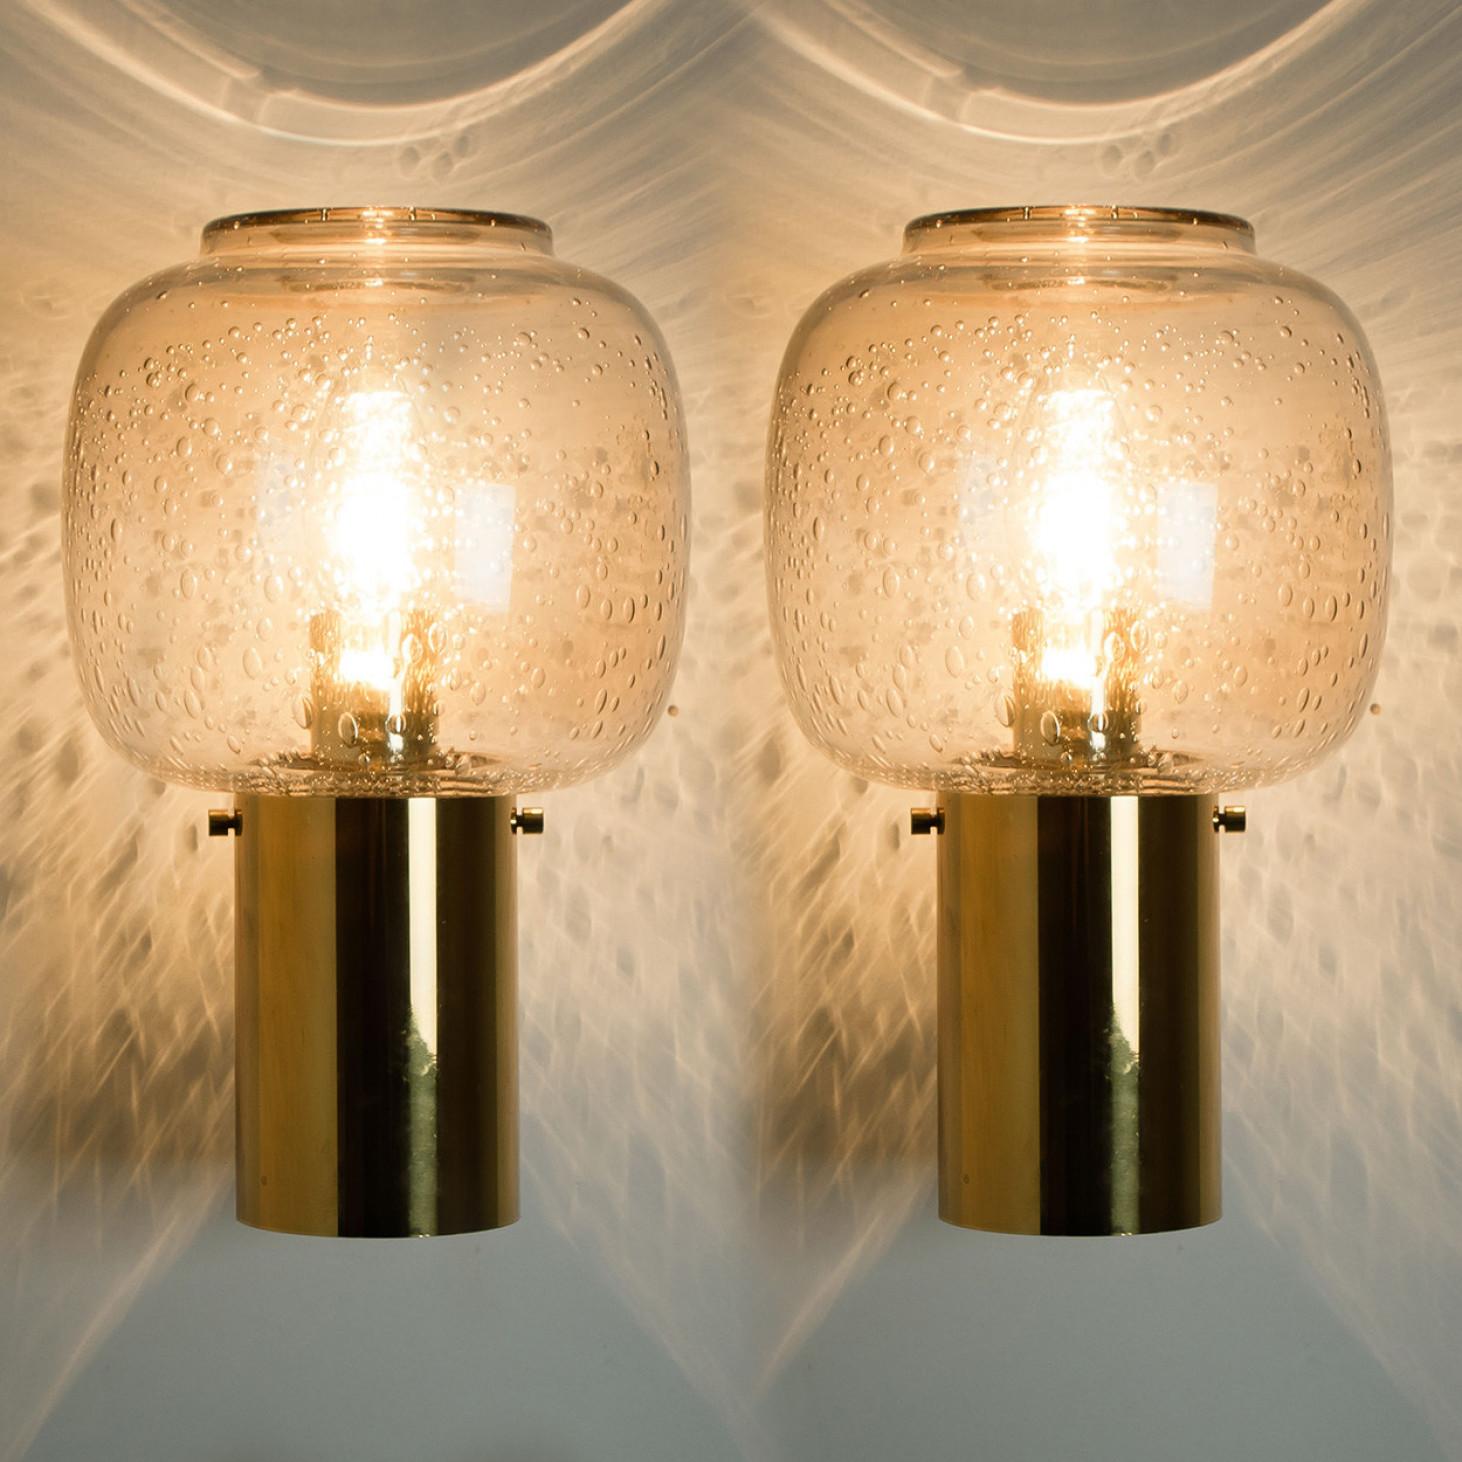 1 Of the 3 Brass and Glass Wall Lights in style of Hans Agne Jakobsson , circa 1 For Sale 1